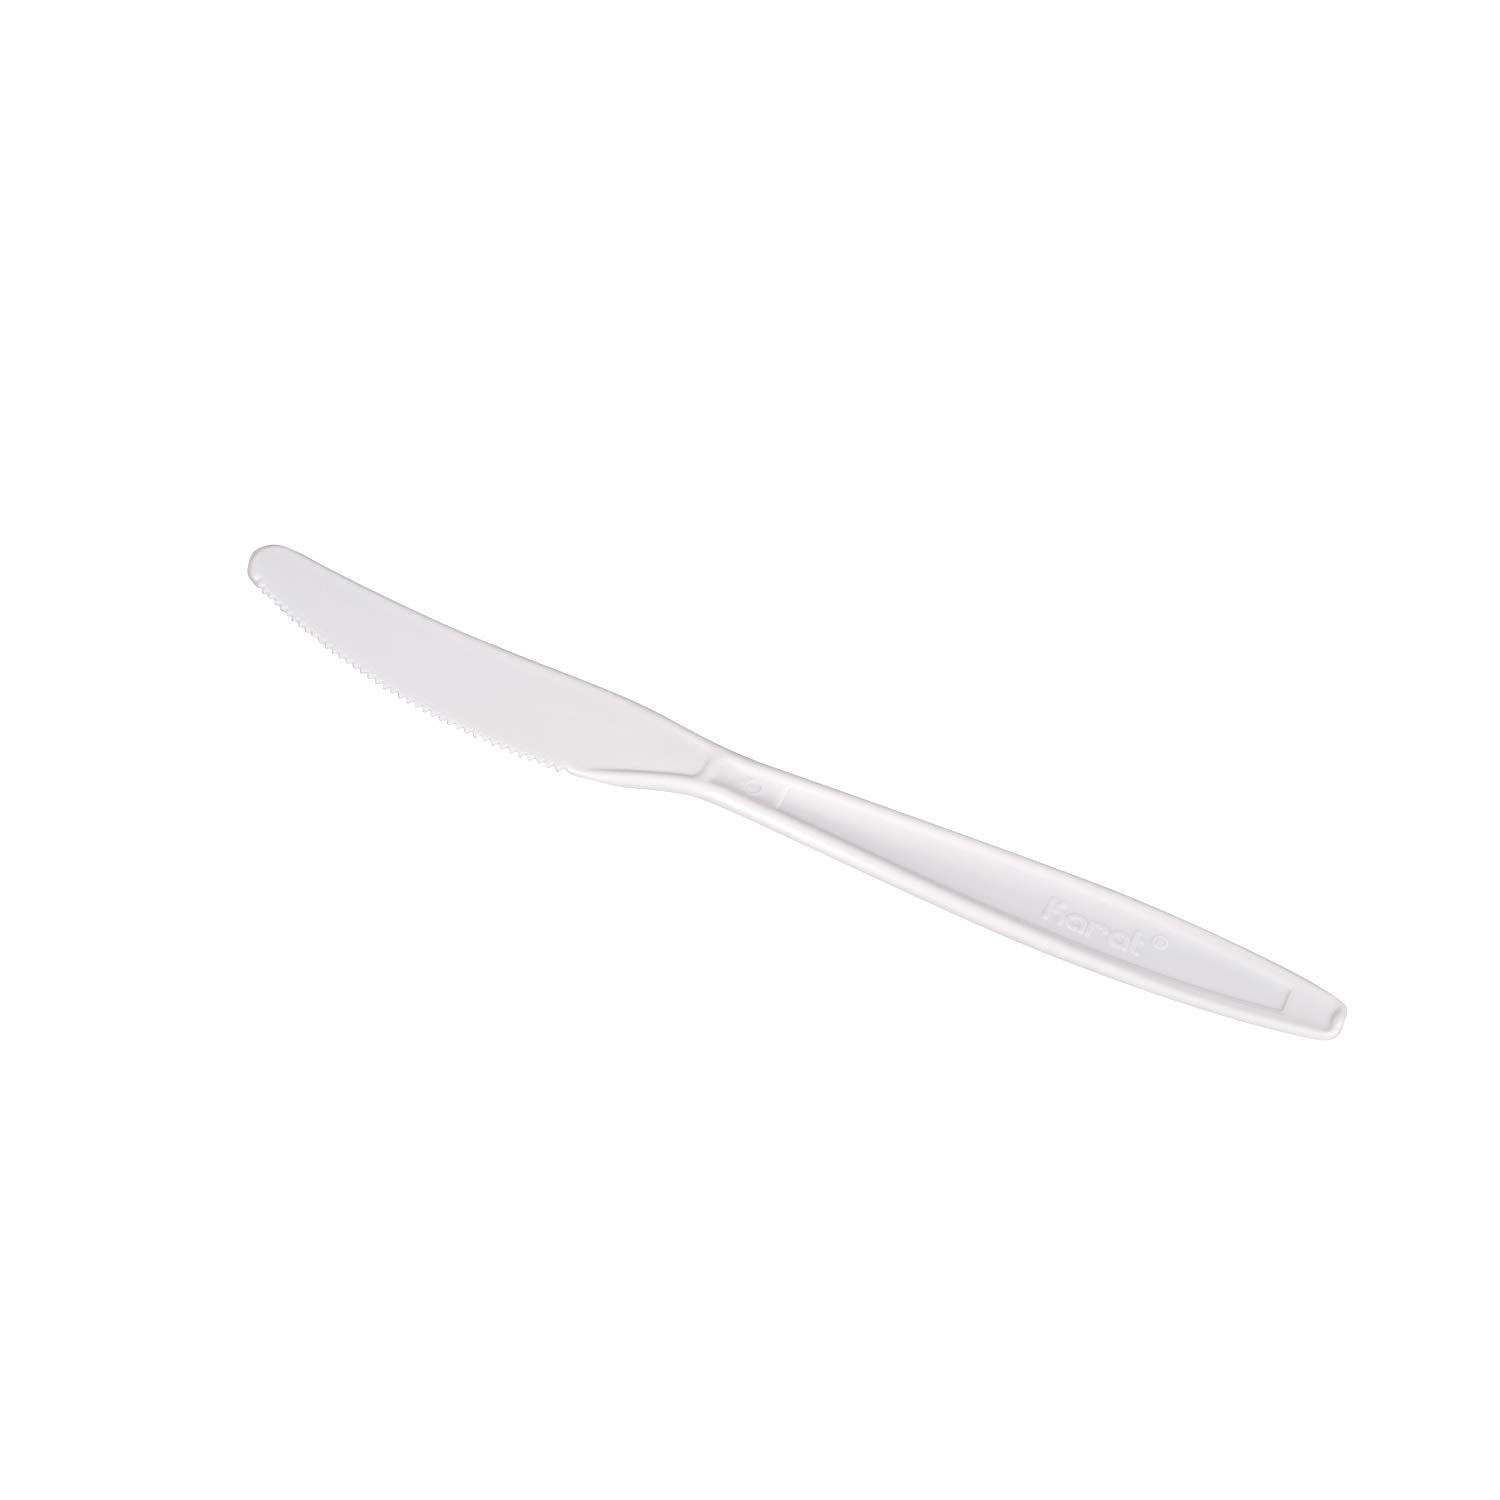 Medium Weight Knife - White Colour 1200 COUNT